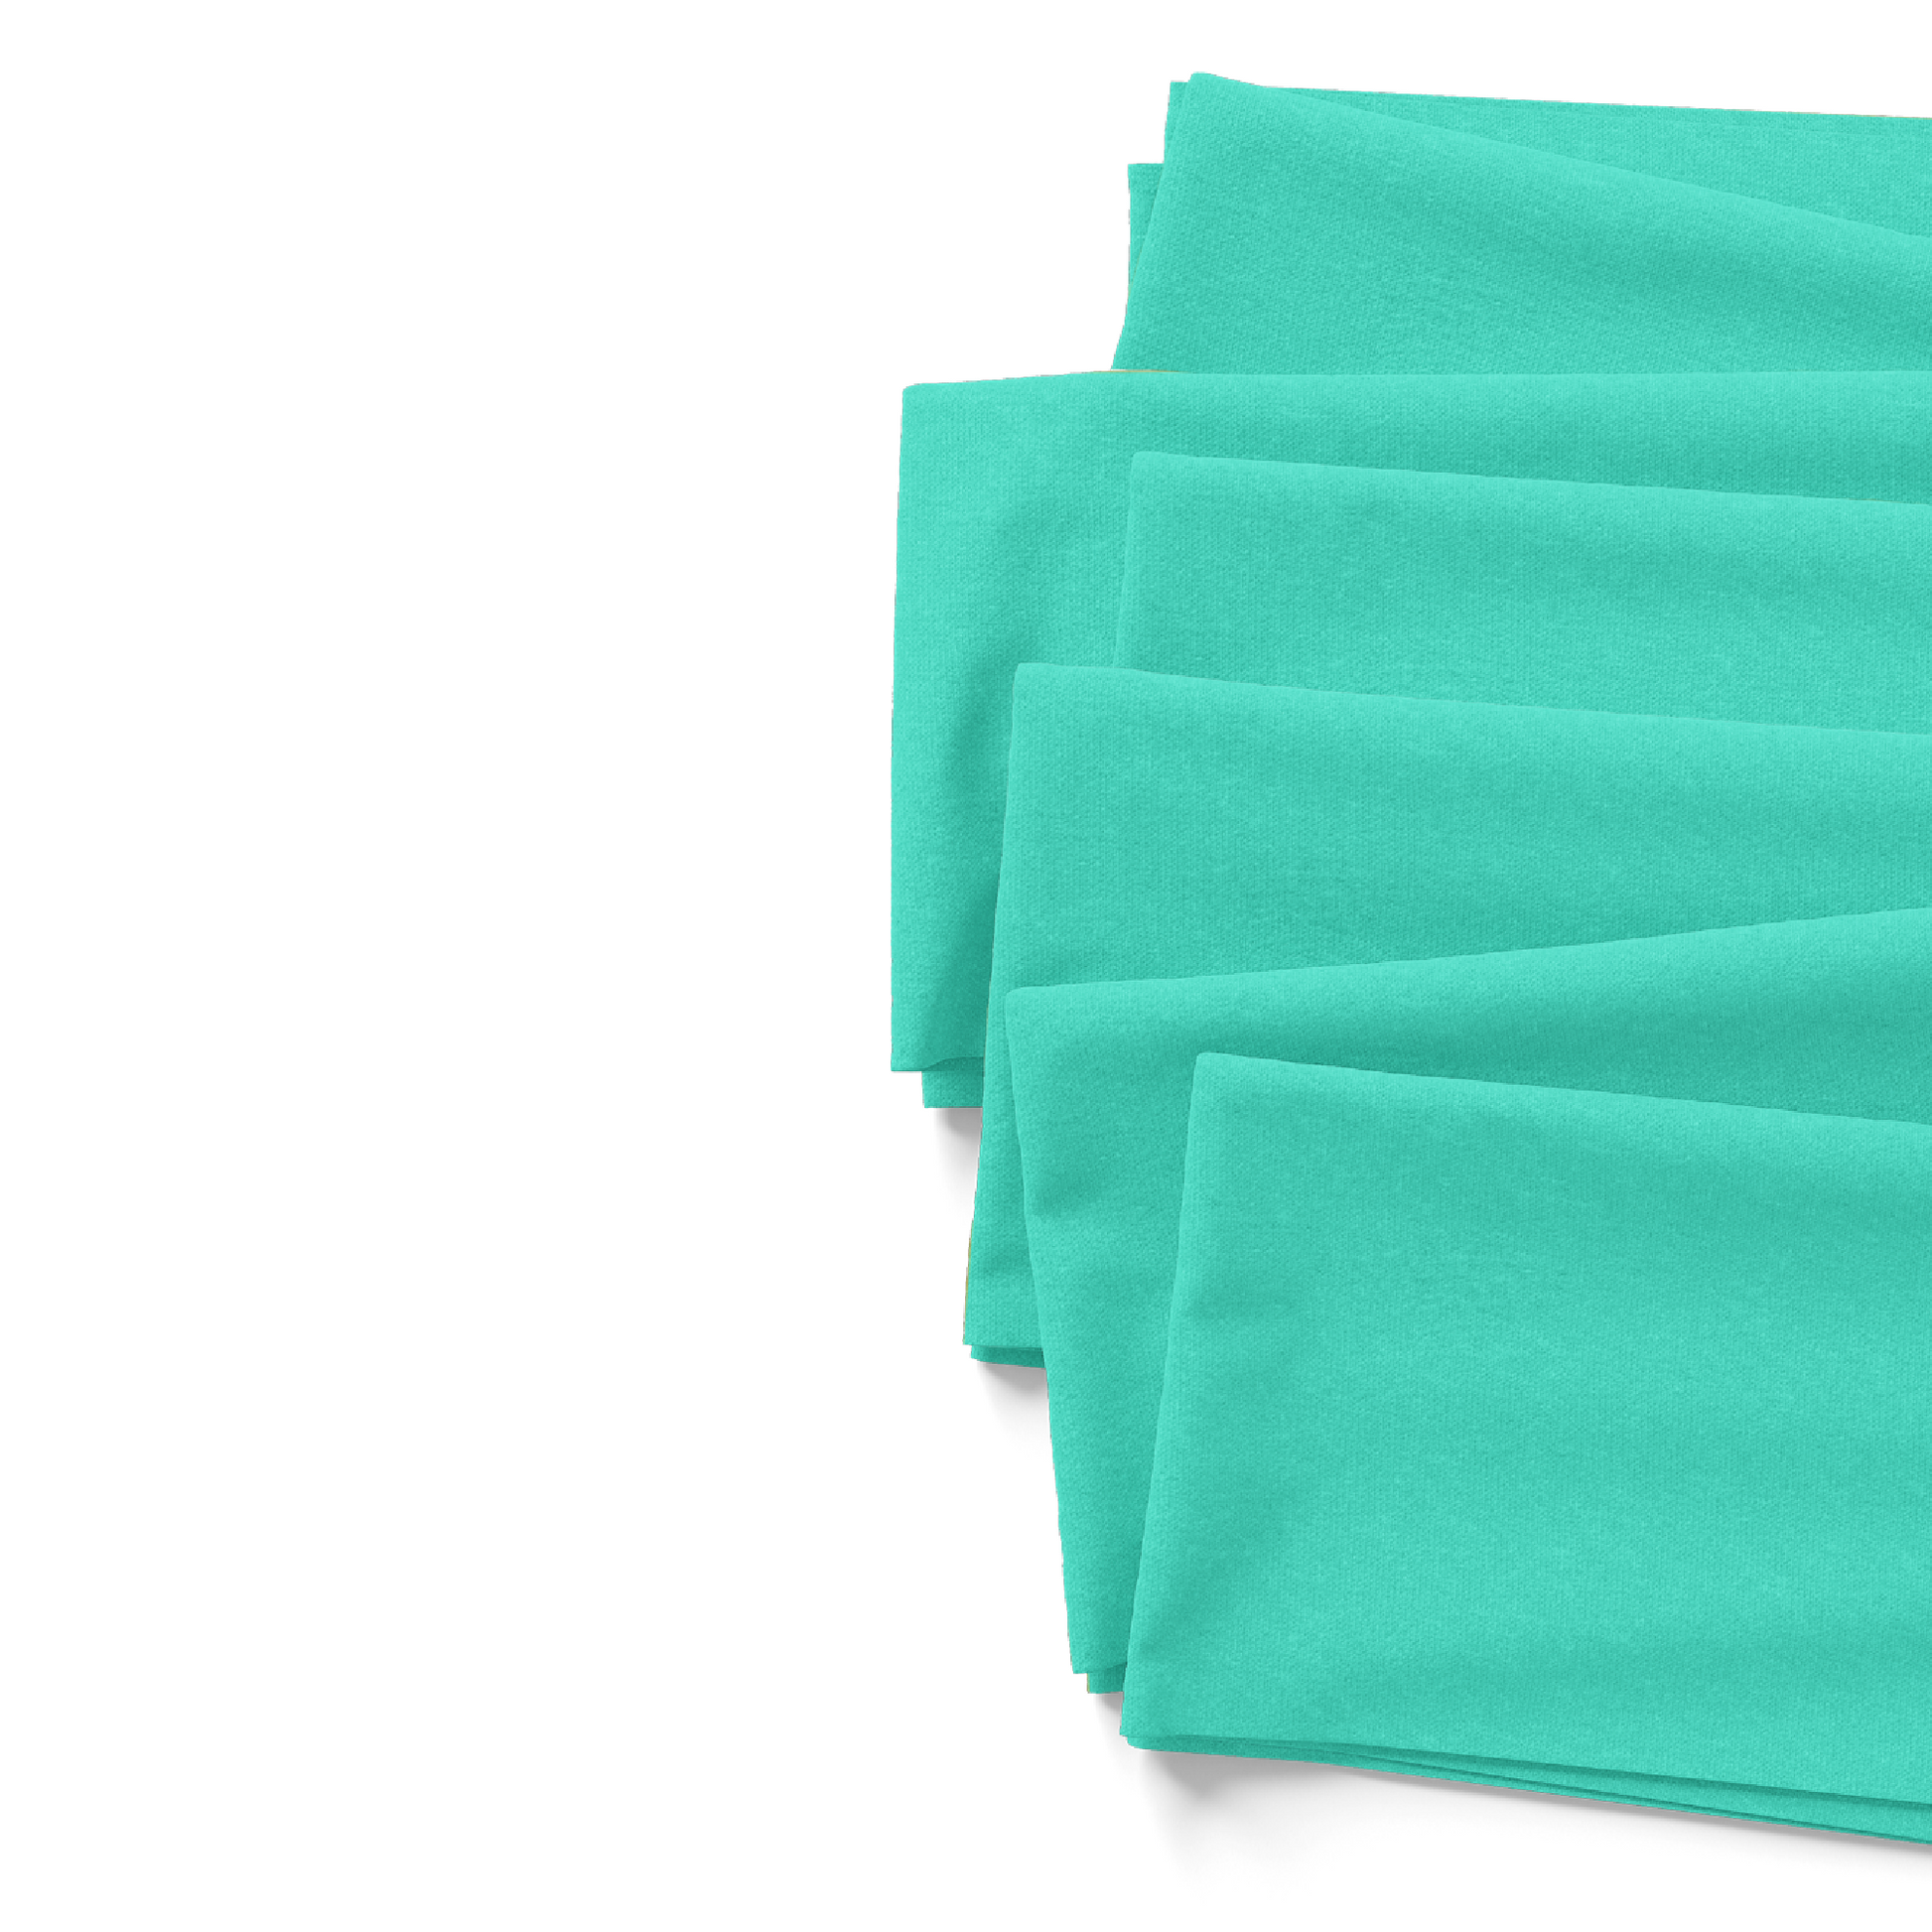 Fabric by the yard available in liverpool, ribbed, DBP, polyester, and neoprene in turquoise.